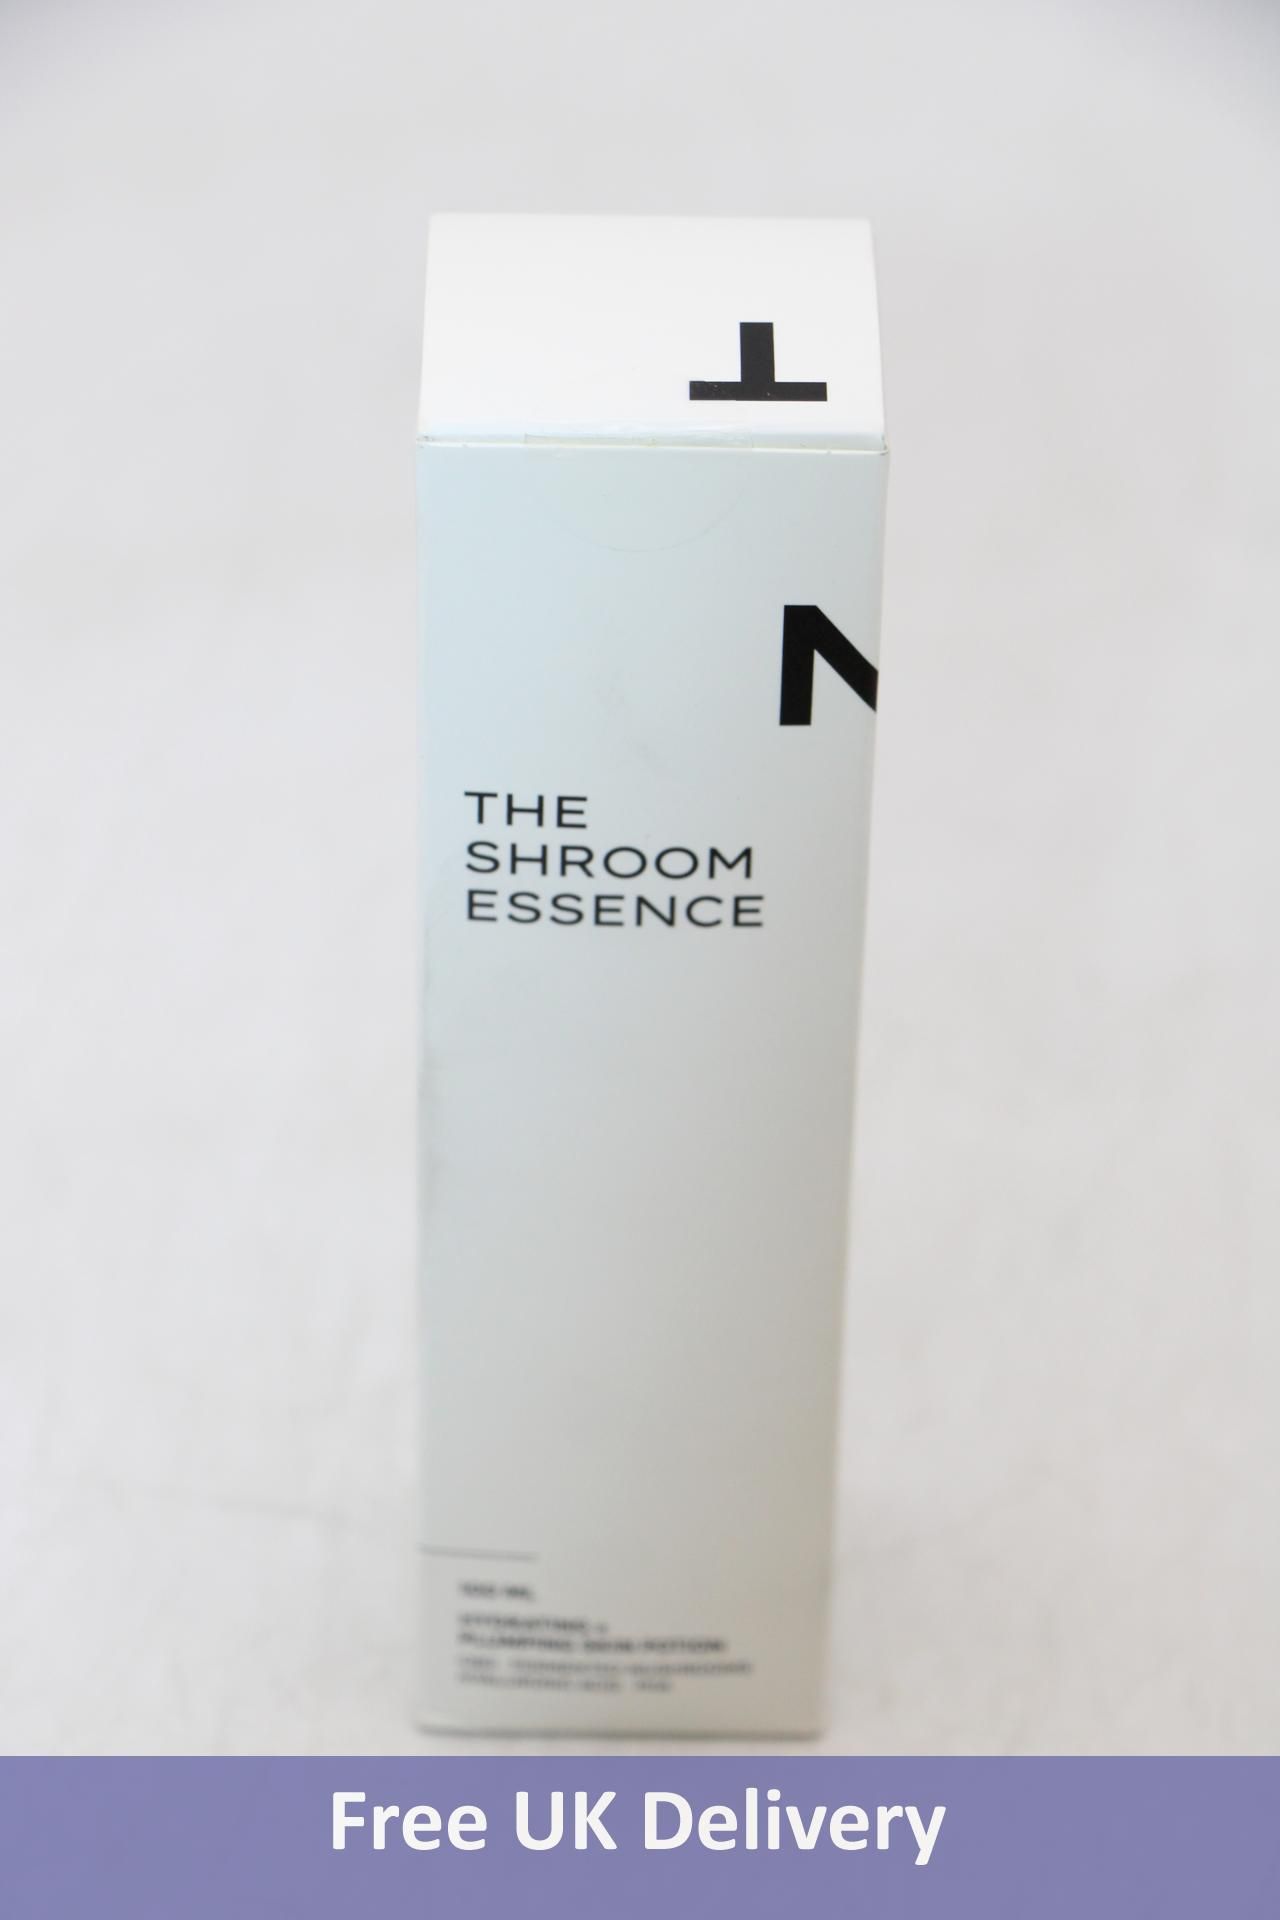 Seven Mantle The Shroom Essence Bottle Hydrating x Plumping Skin Potion Cbd, Size 100ml - Image 2 of 7